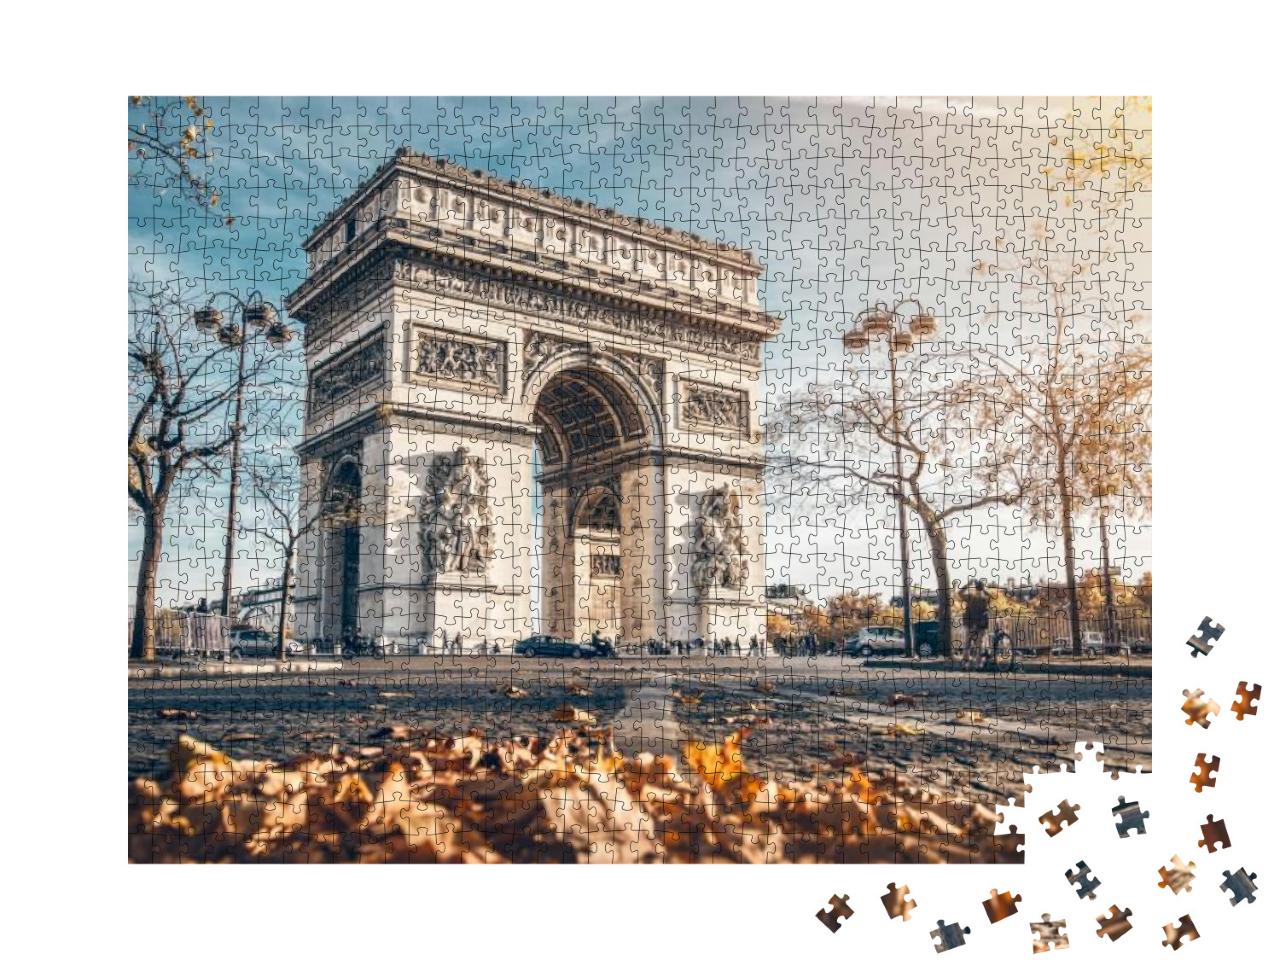 Arc De Triomphe Located in Paris, in Autumn Scenery... Jigsaw Puzzle with 1000 pieces